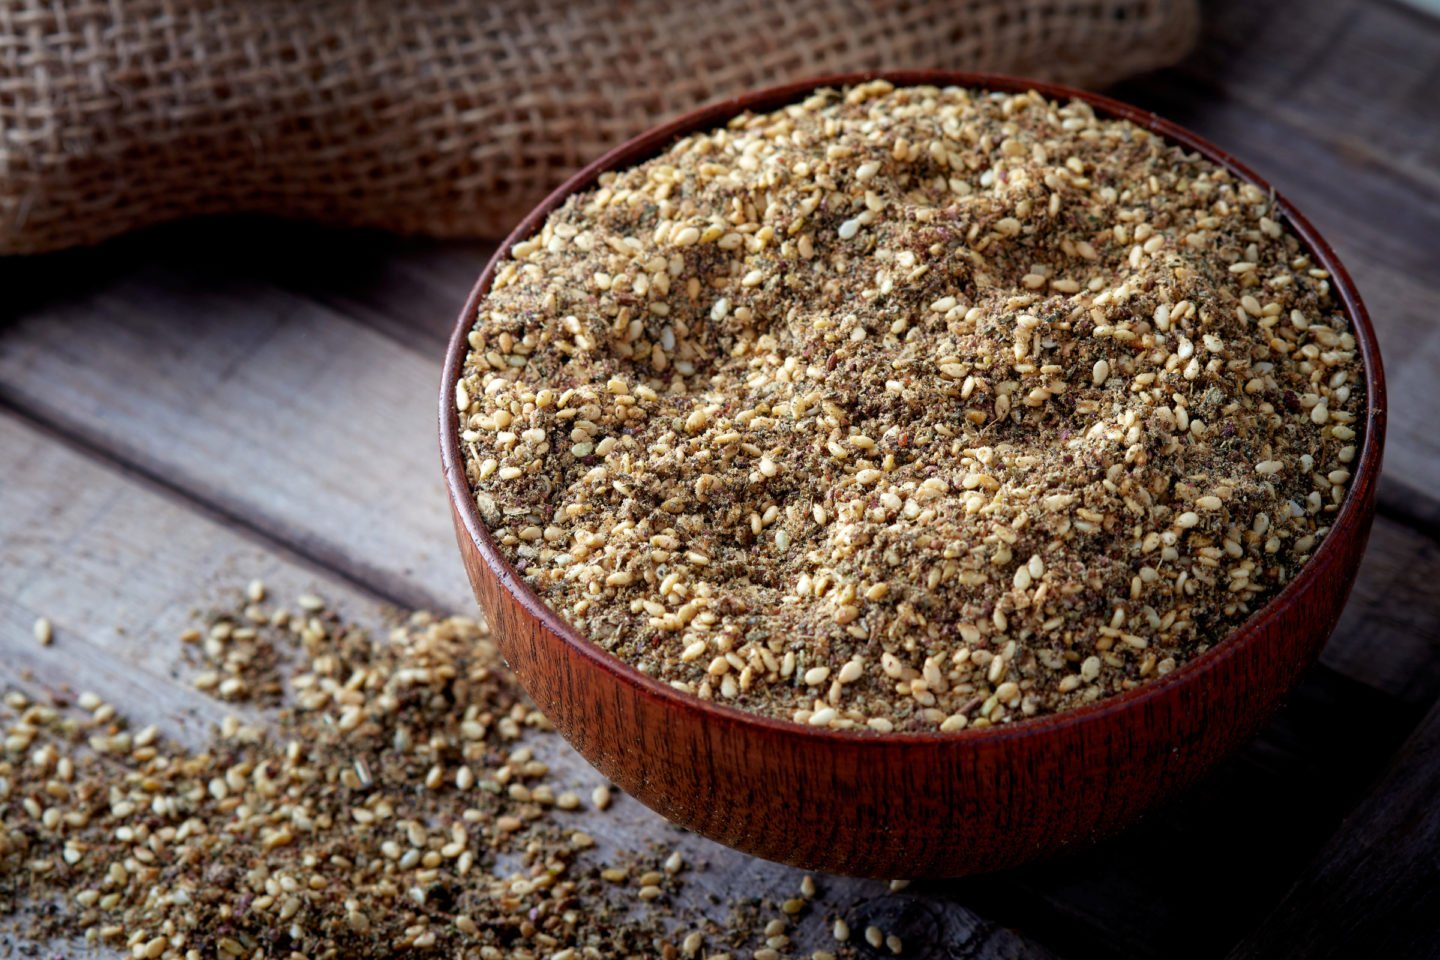 za'atar or zatar is a Middle Eastern spice